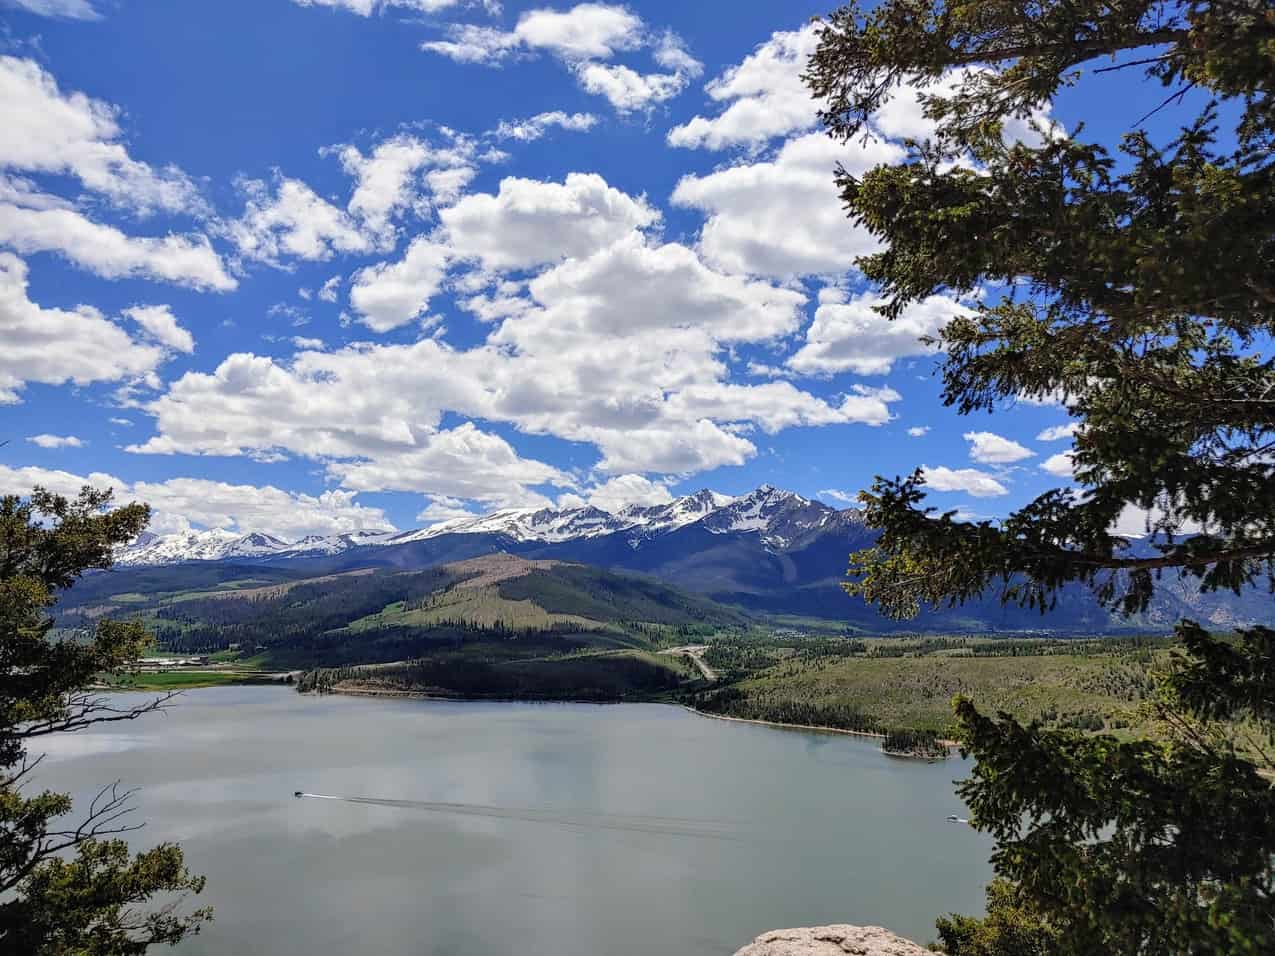 View of Lake Dillon from Sapphire Point, a hike near Breckenridge